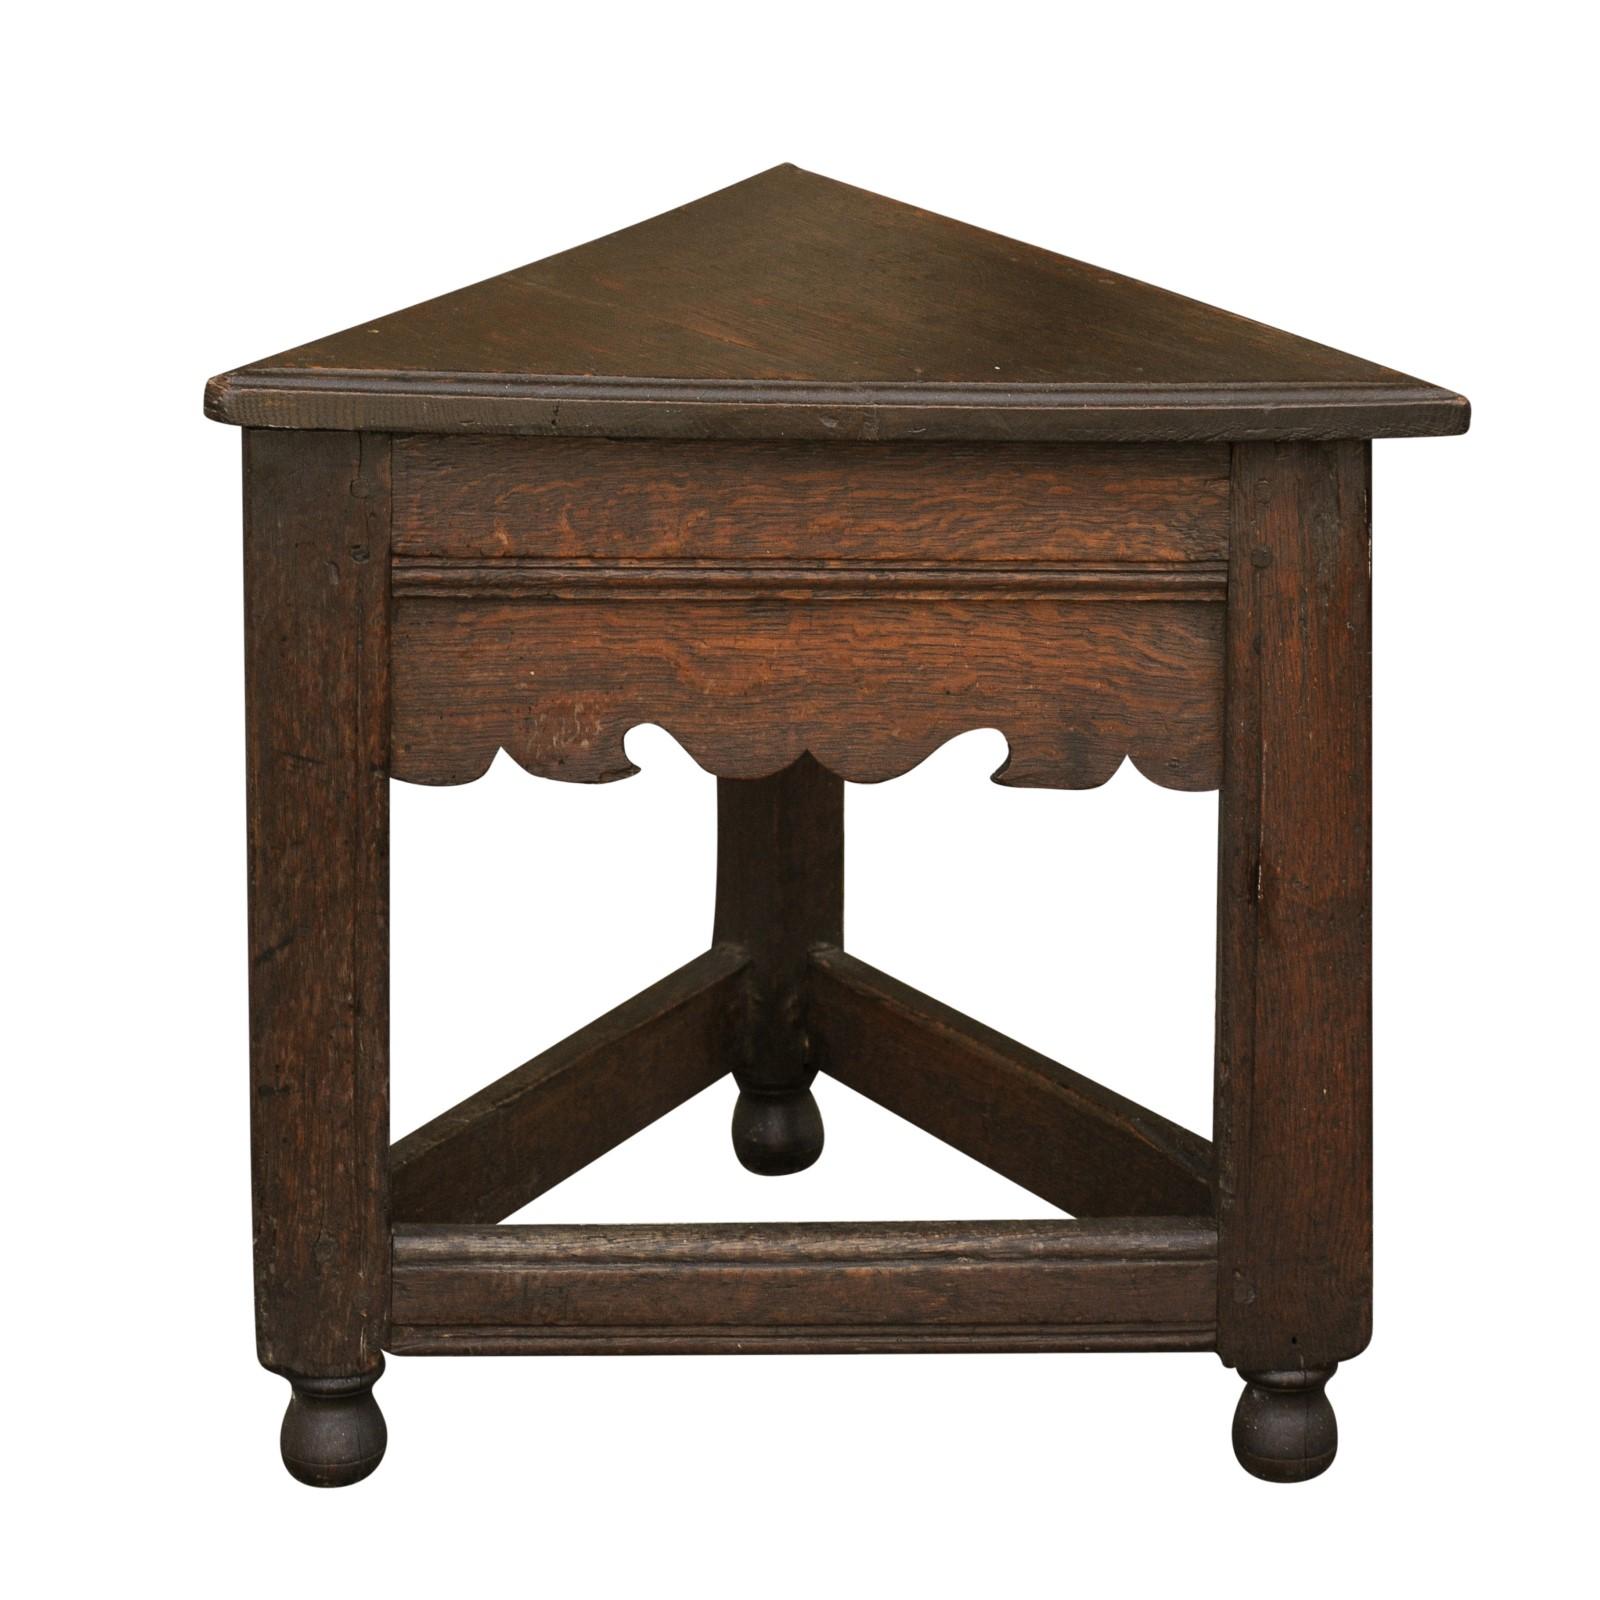 English Triangular Oak Stool with Carved Apron and Stretcher, circa 1840